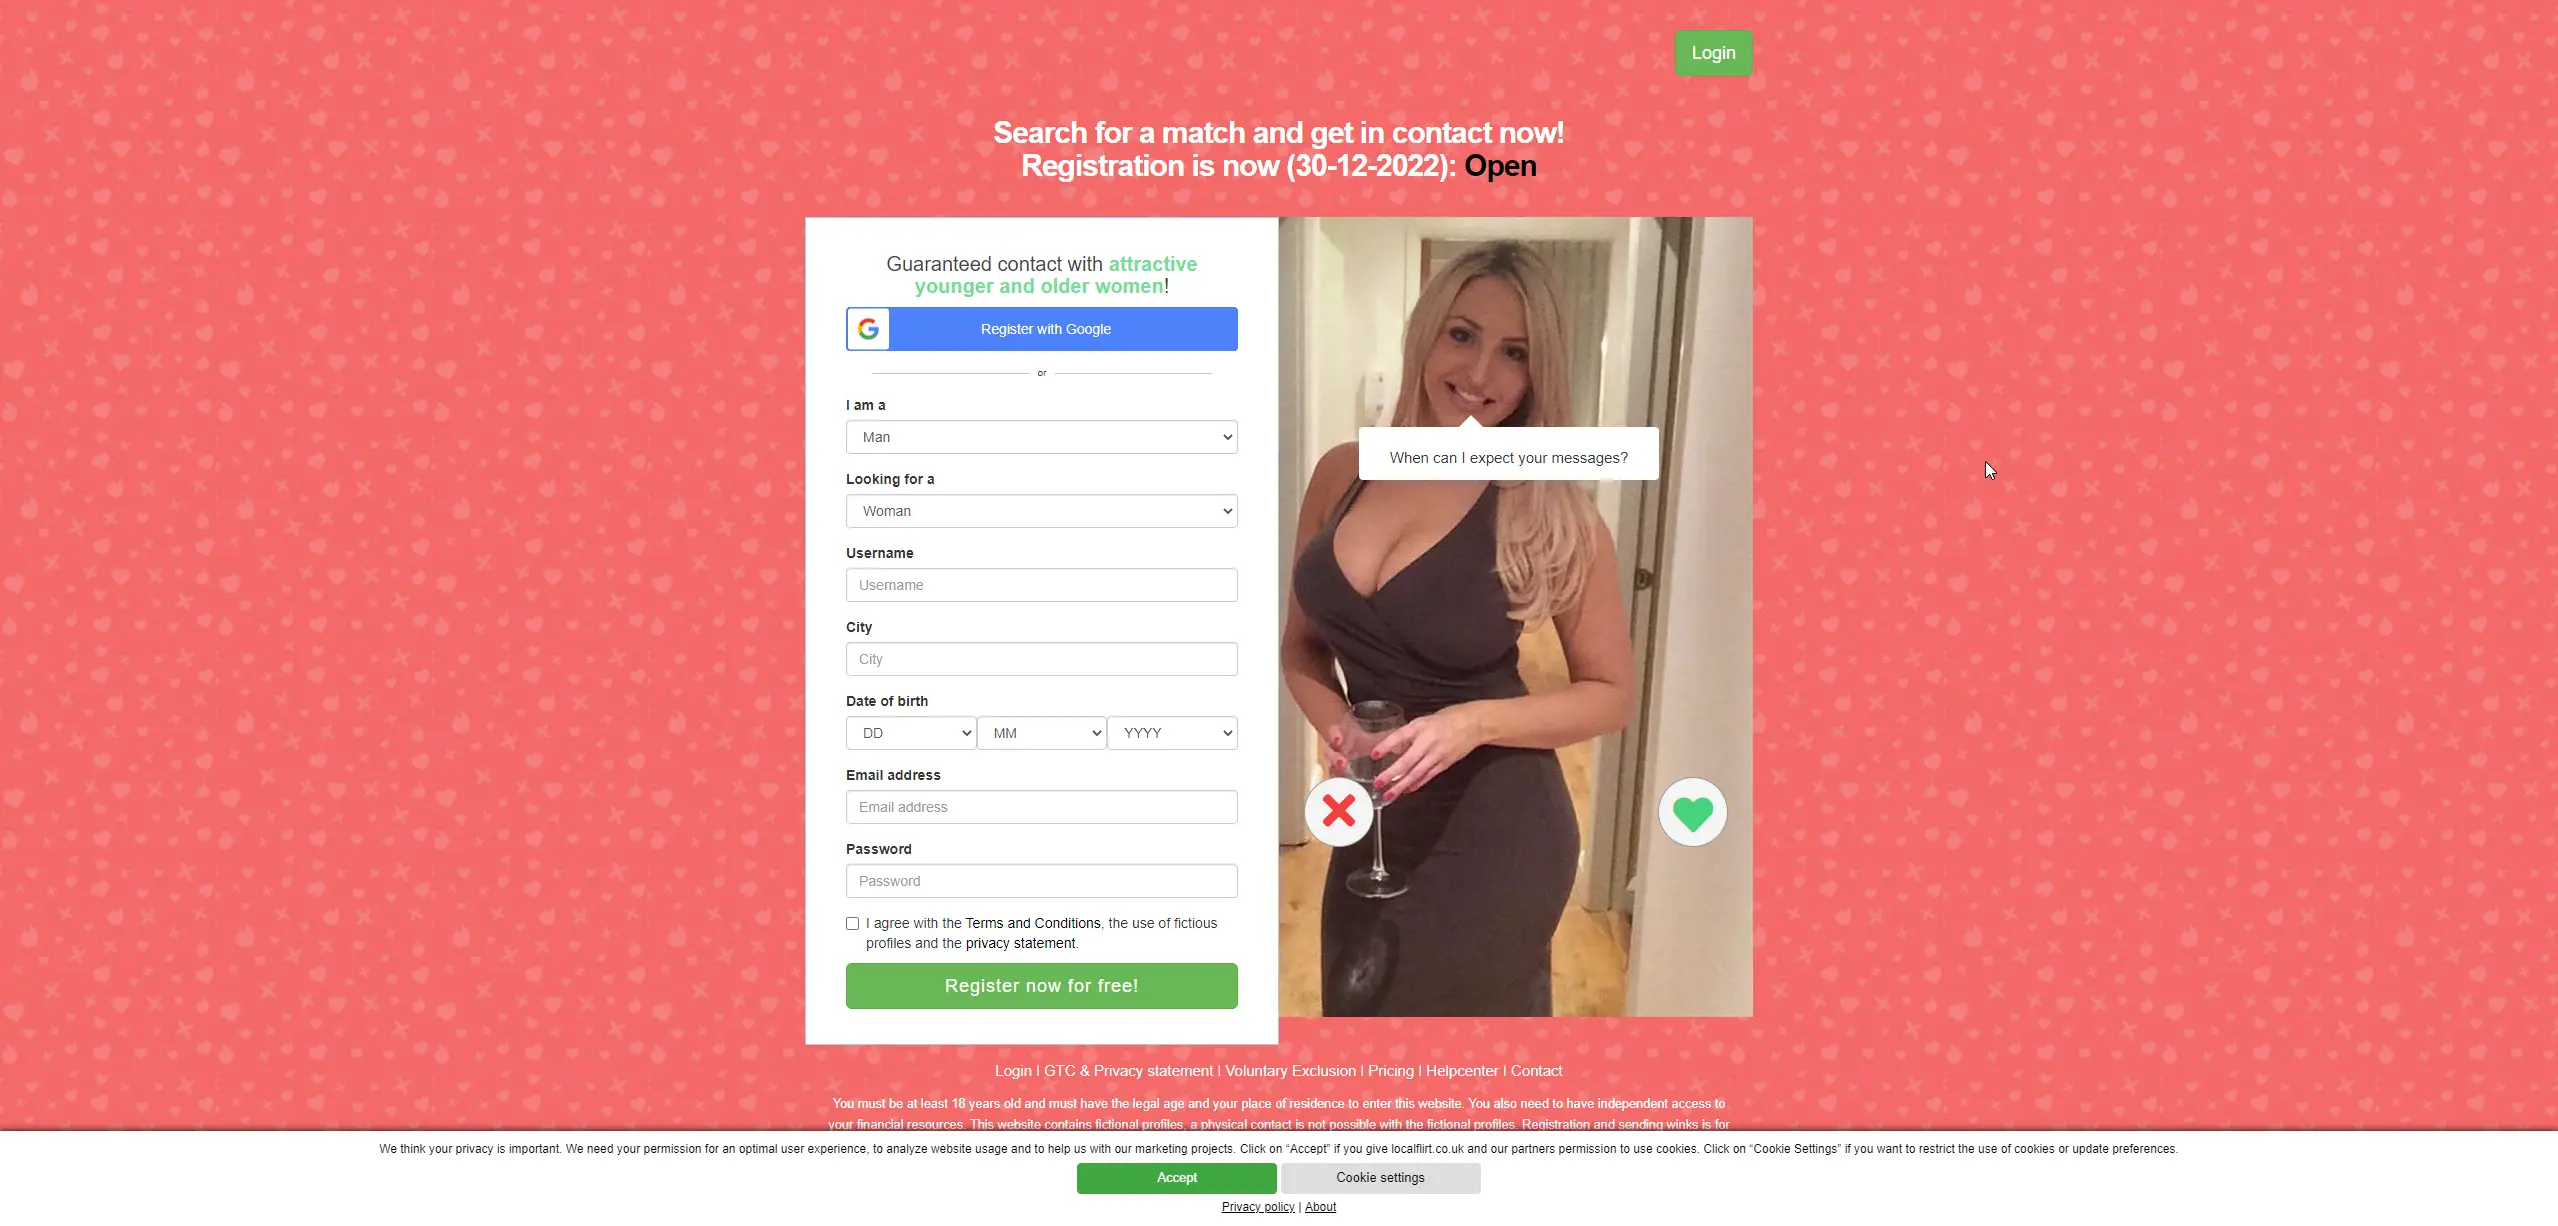 LocalFlirt dating site homepage with a blurred man holding his phone and texting a woman.